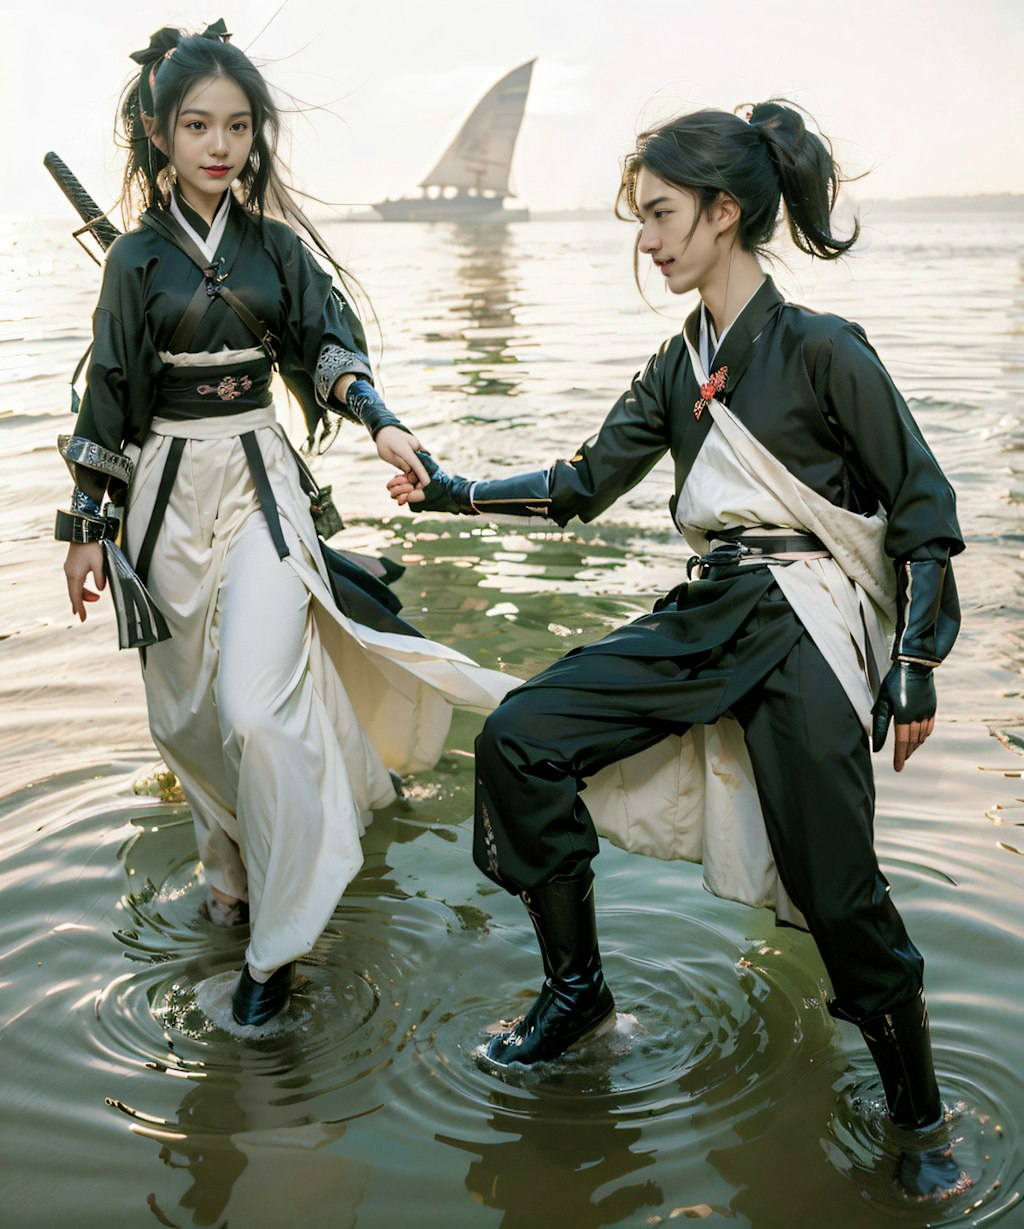 WUXIA style